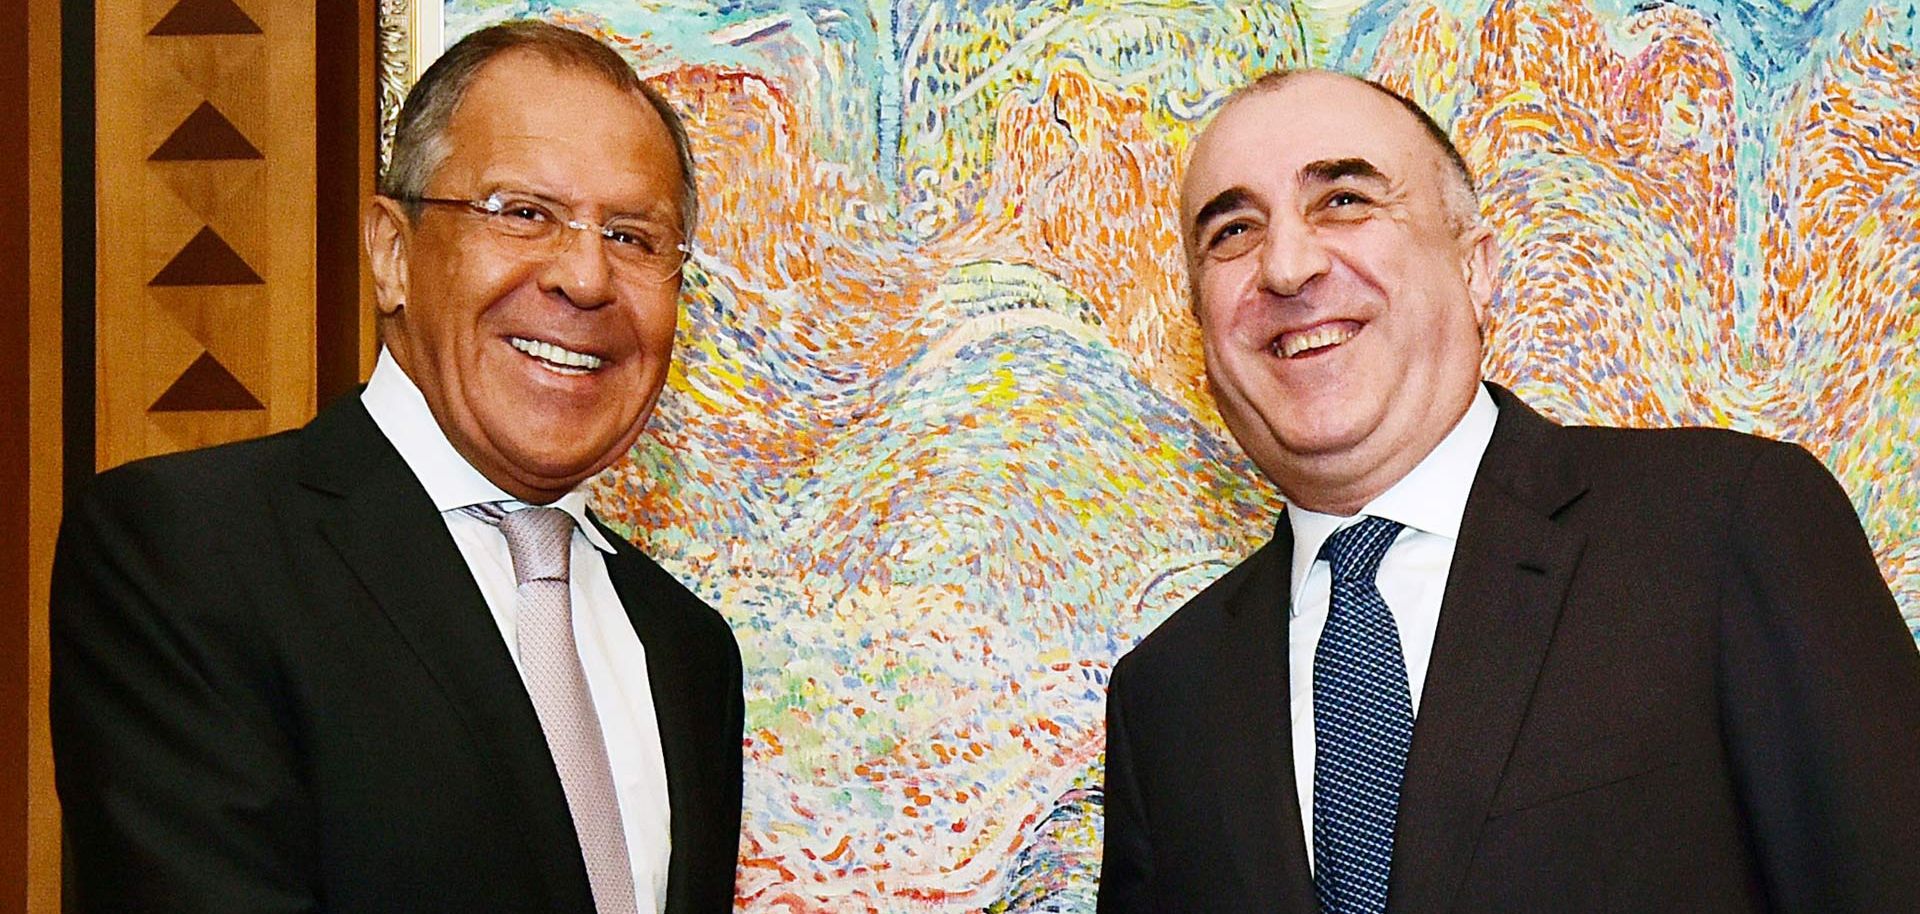 Russian Foreign Minister Sergei Lavrov (L) met with his Azerbaijani counterpart, Elmar Mammadyarov, in Baku on July 12 to discuss the Nagorno-Karabakh dispute. So far, the latest negotiations to resolve the conflict have involved more talk than action.